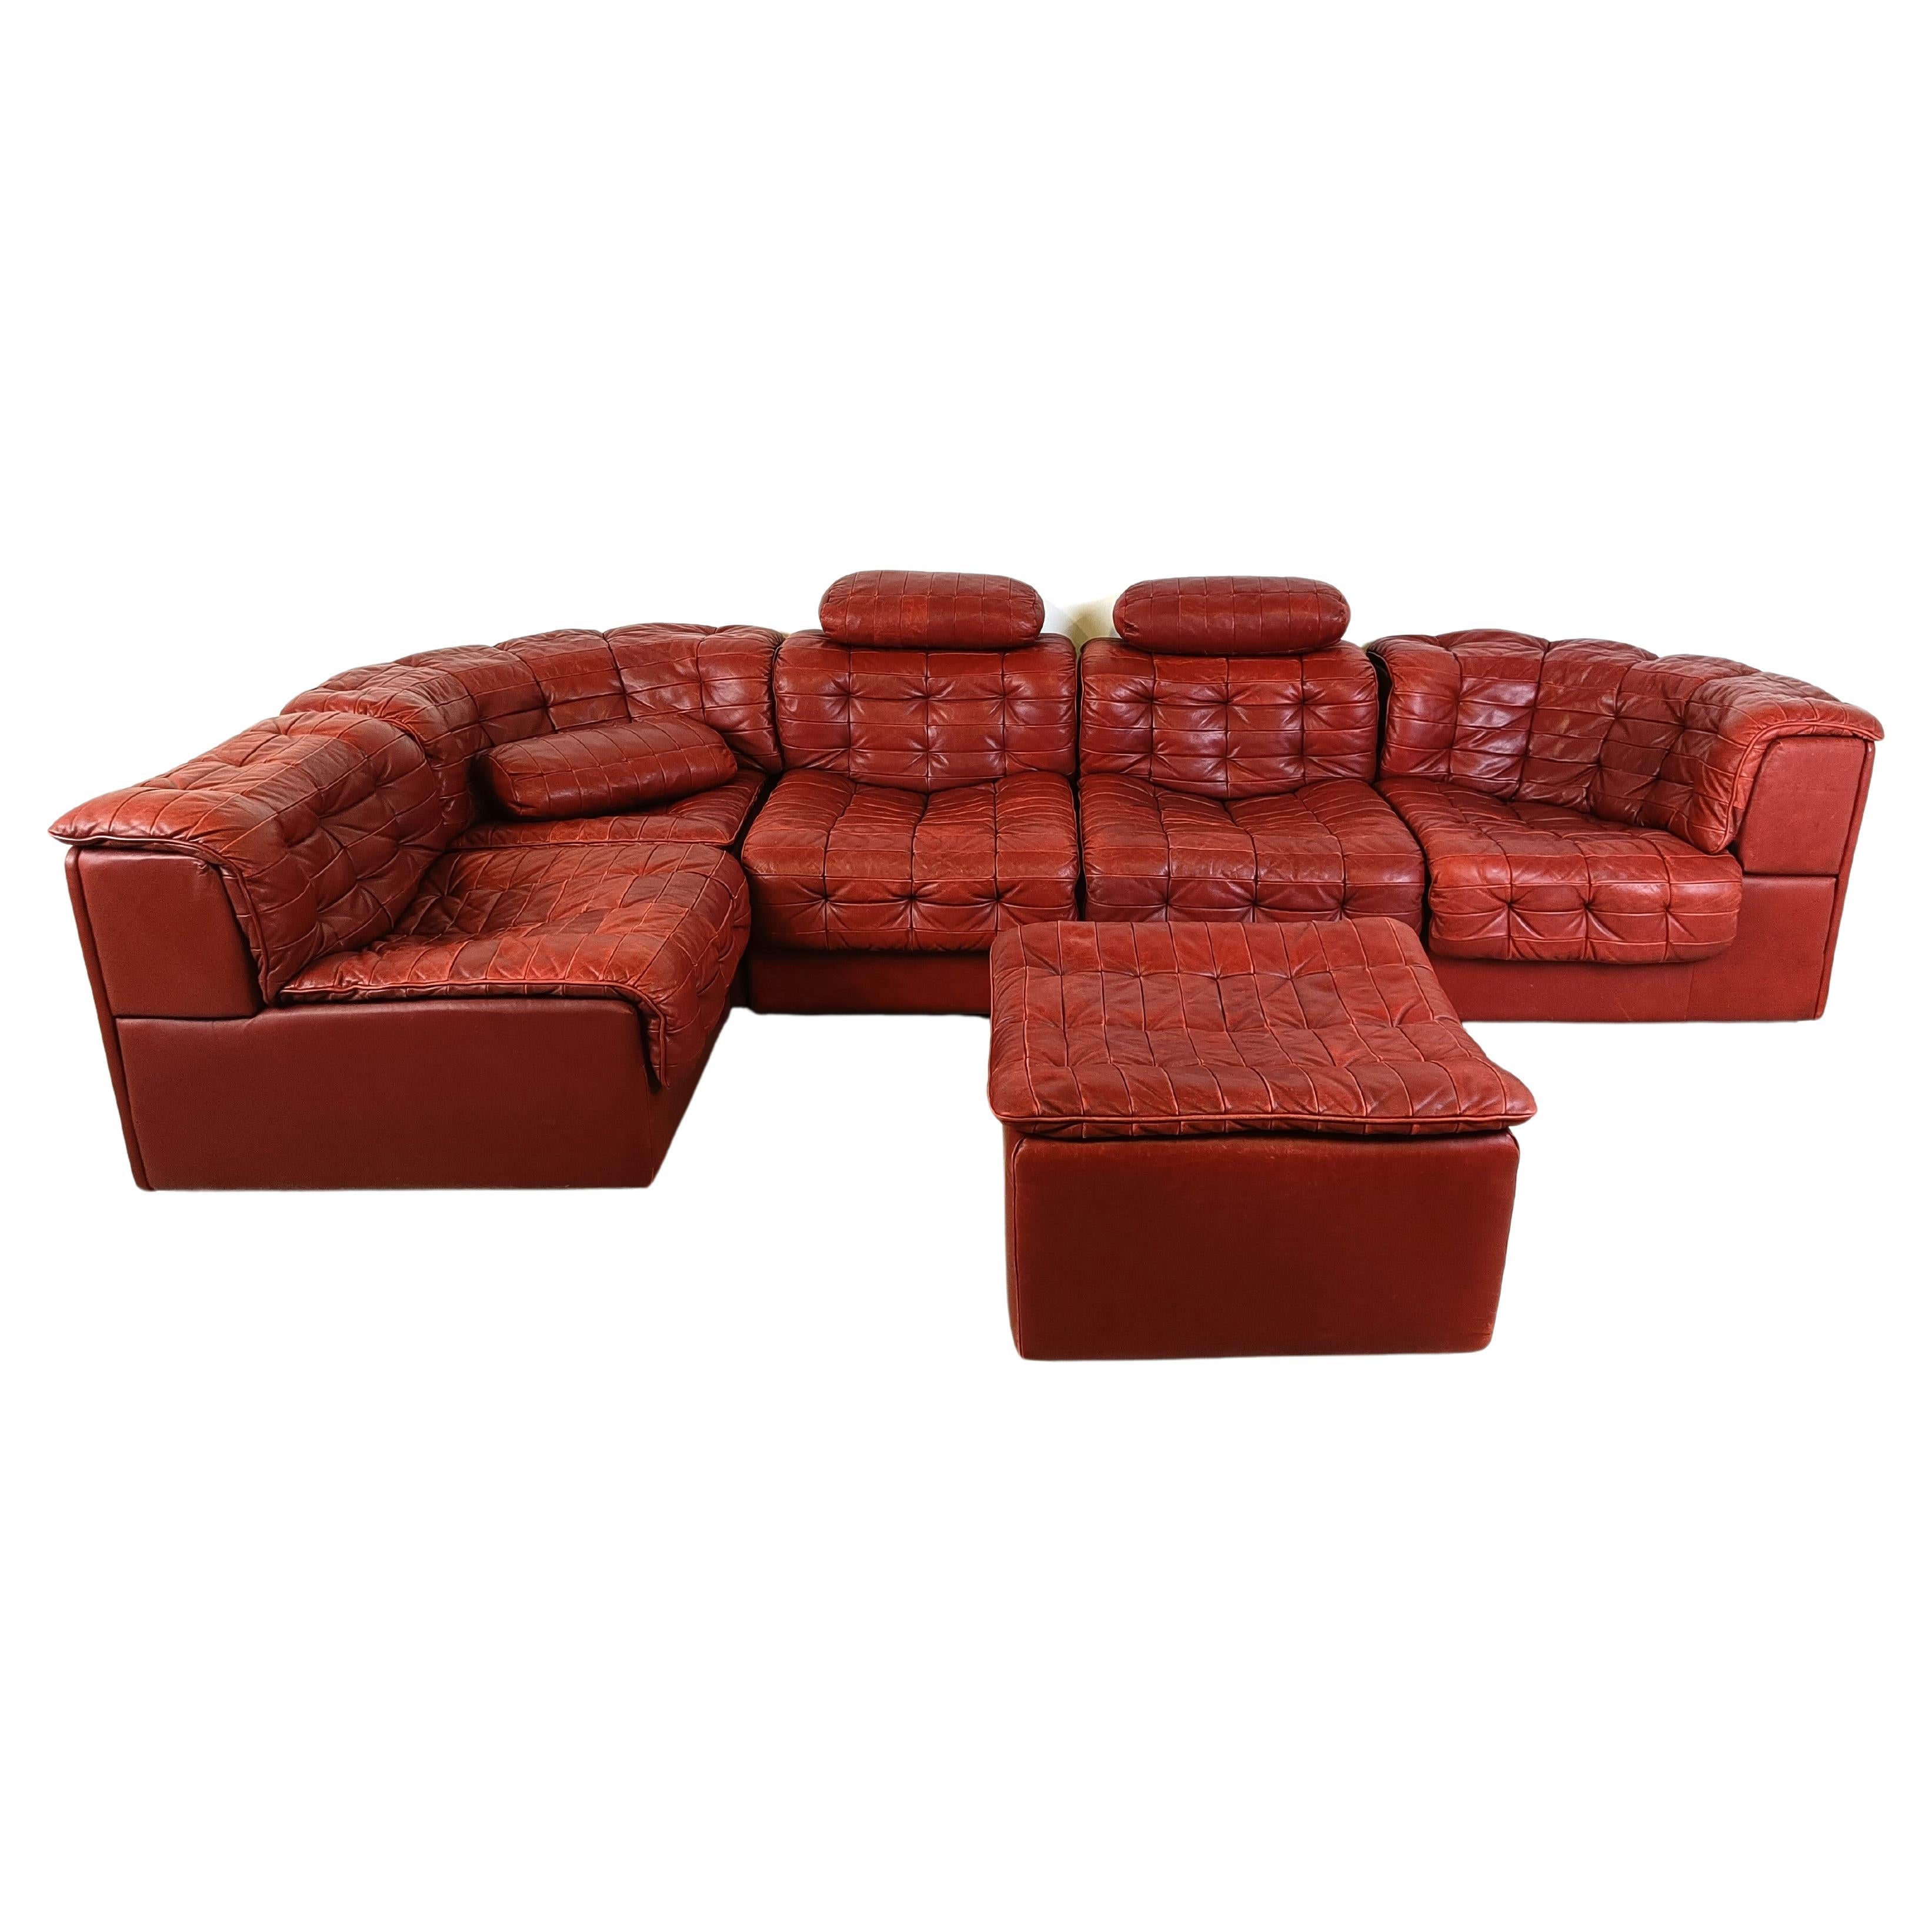 Vintage modular patchwork leather sofa DS11 by Desede, 1970s